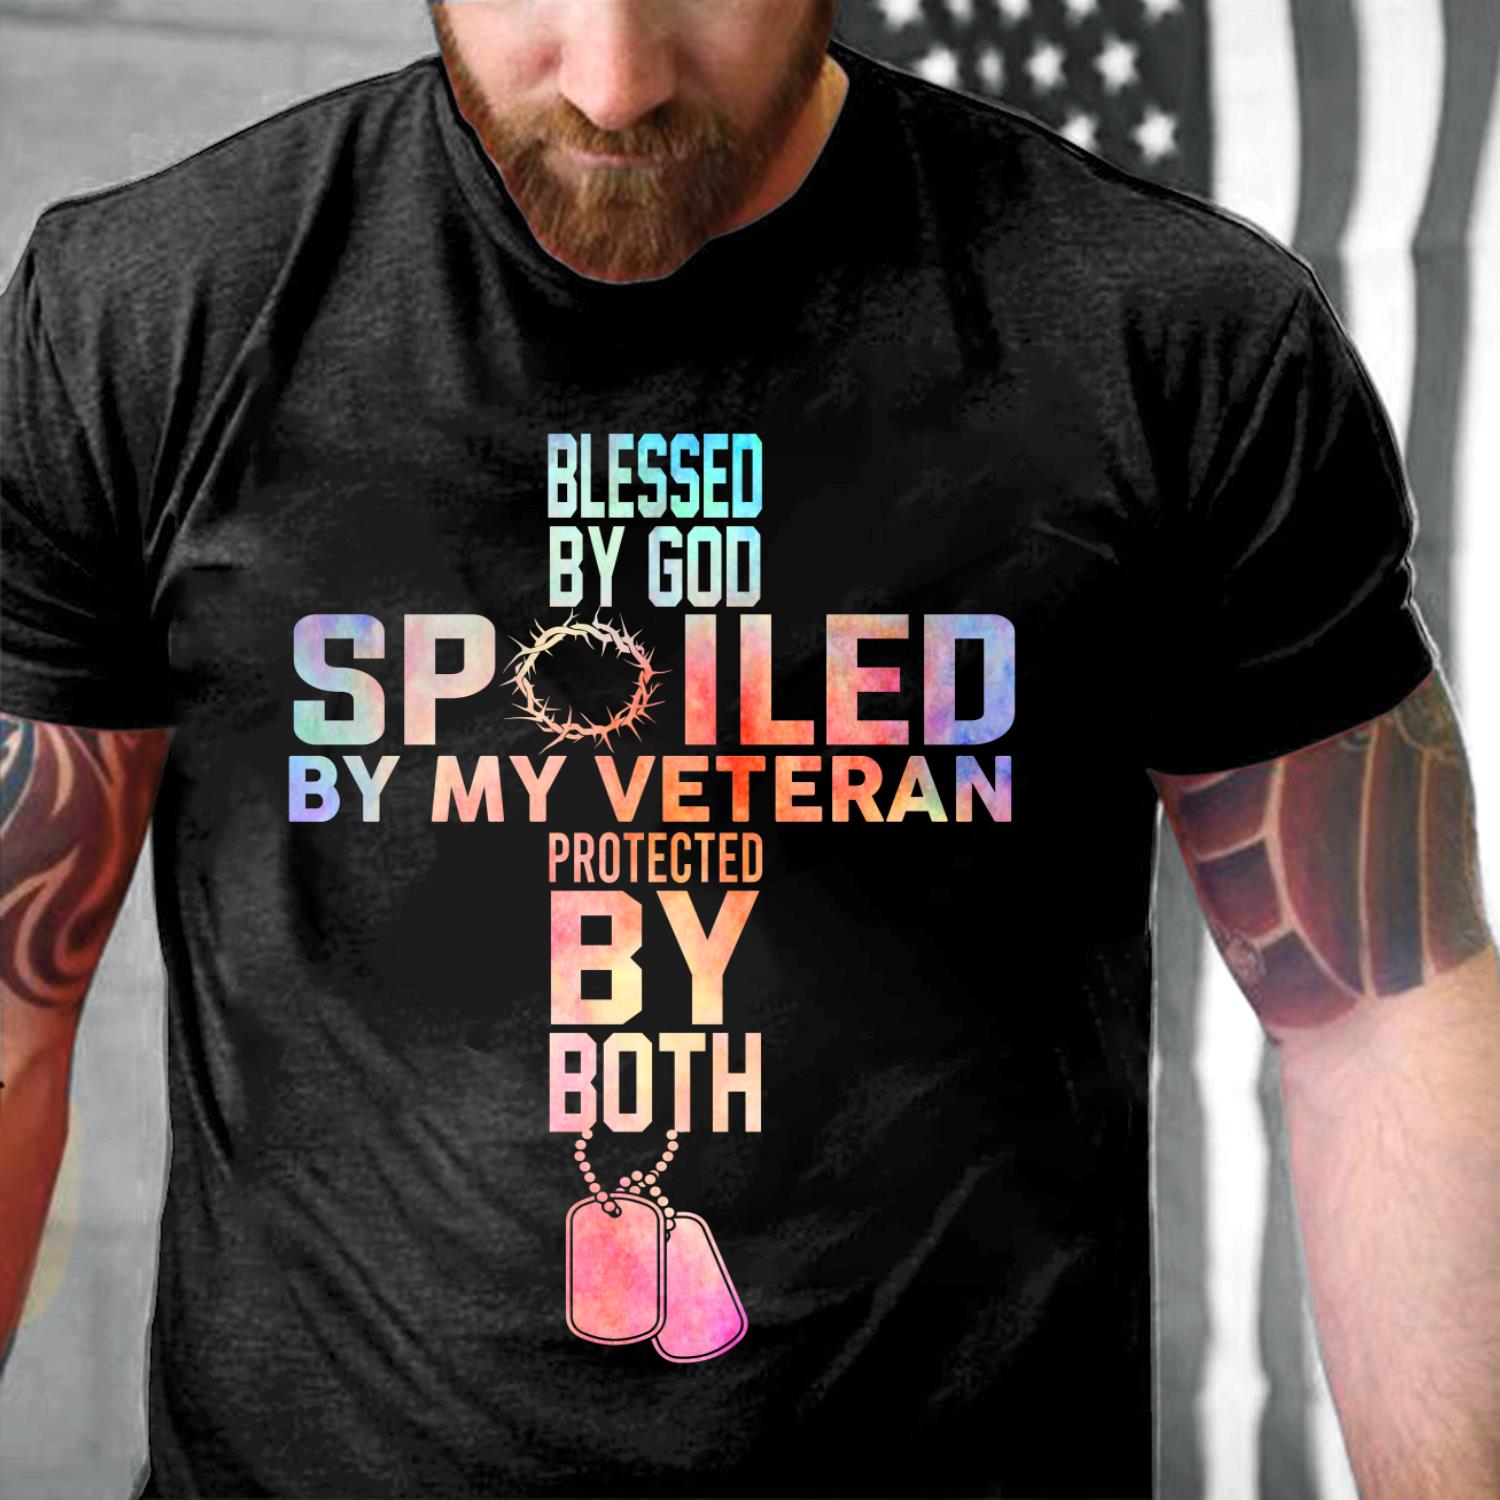 Blessed By God Spoiled By My Veteran Protected By Both T-Shirt